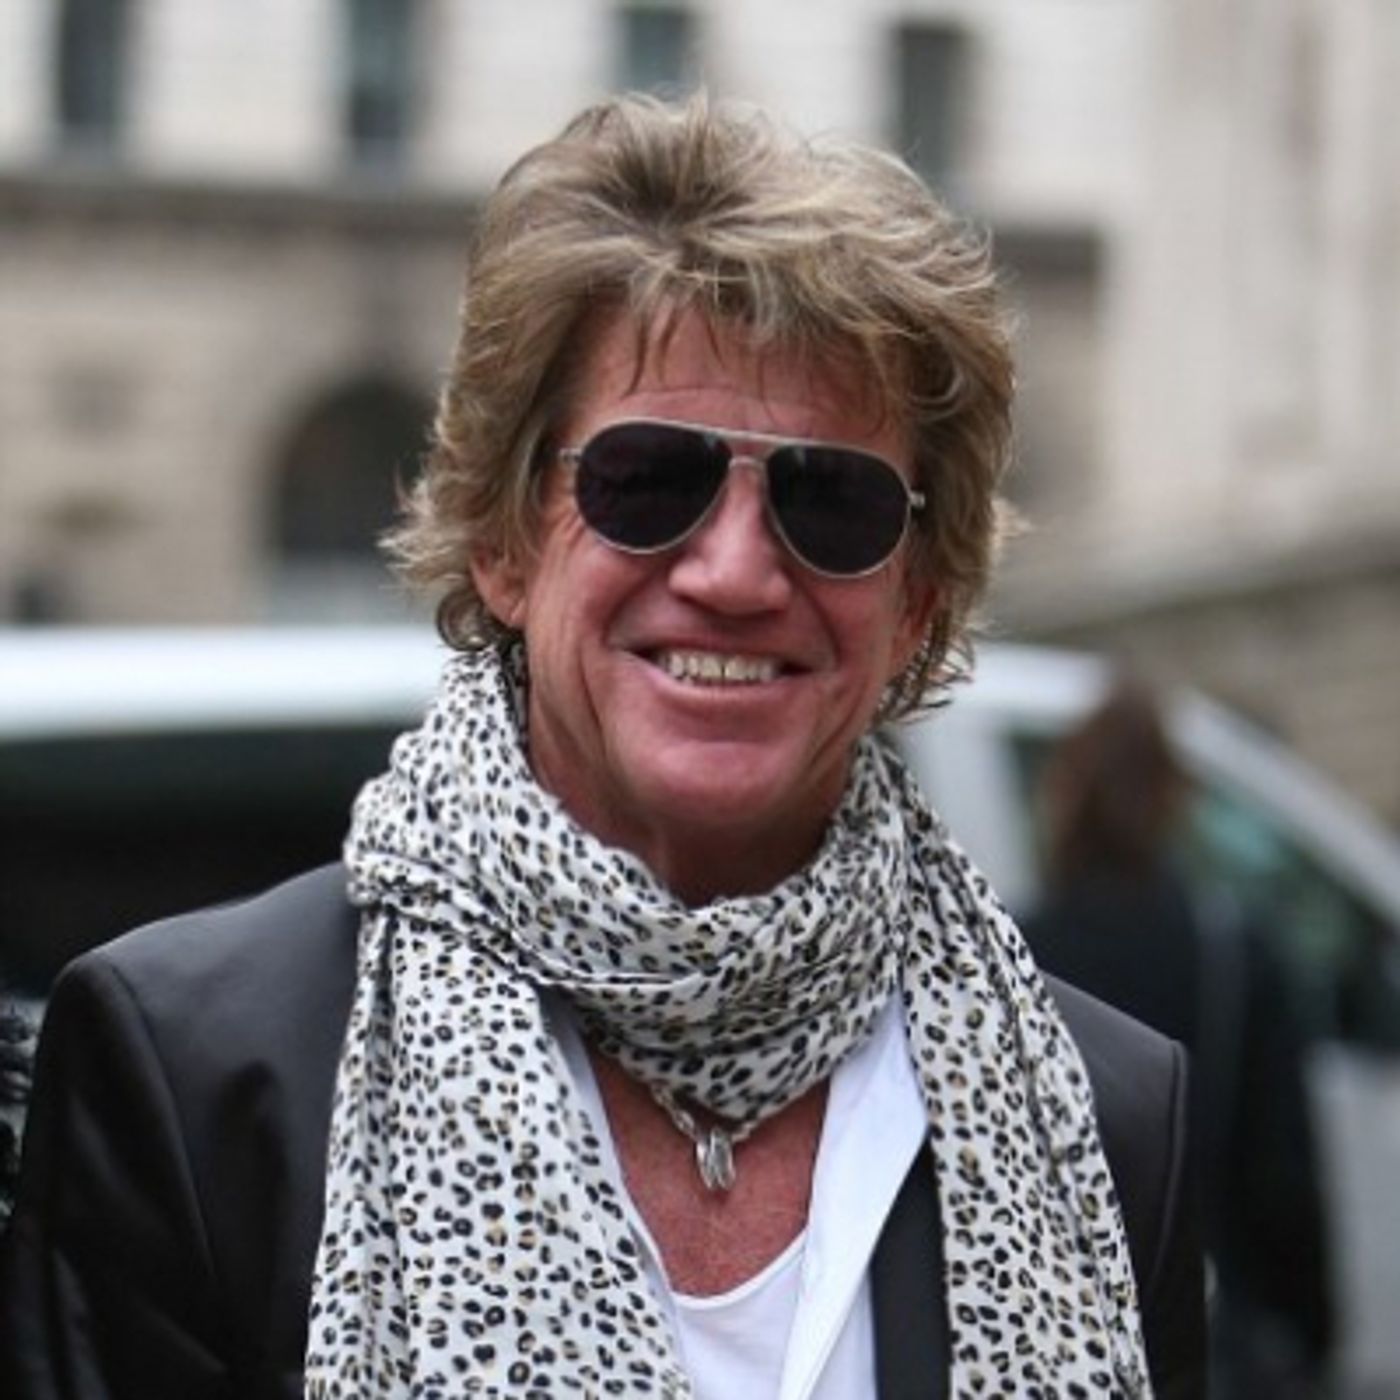 Robin Askwith Talk to Chris Phillips on Classic Chat